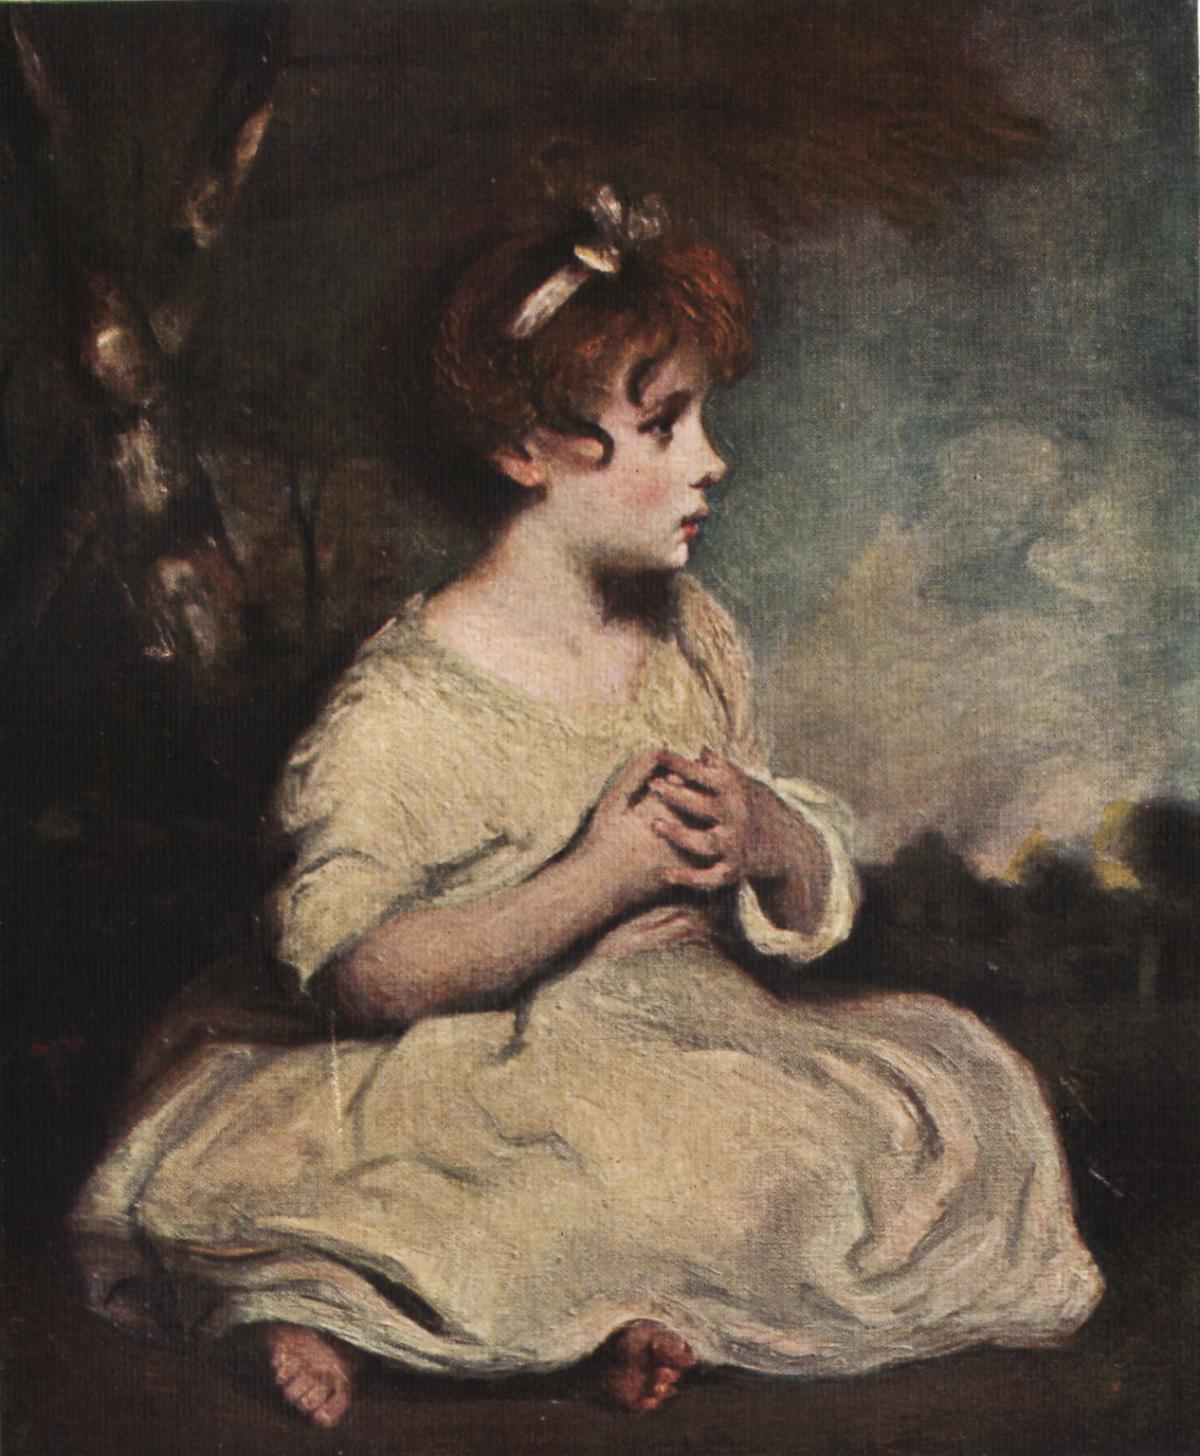 The Age of Innocence by Reynolds